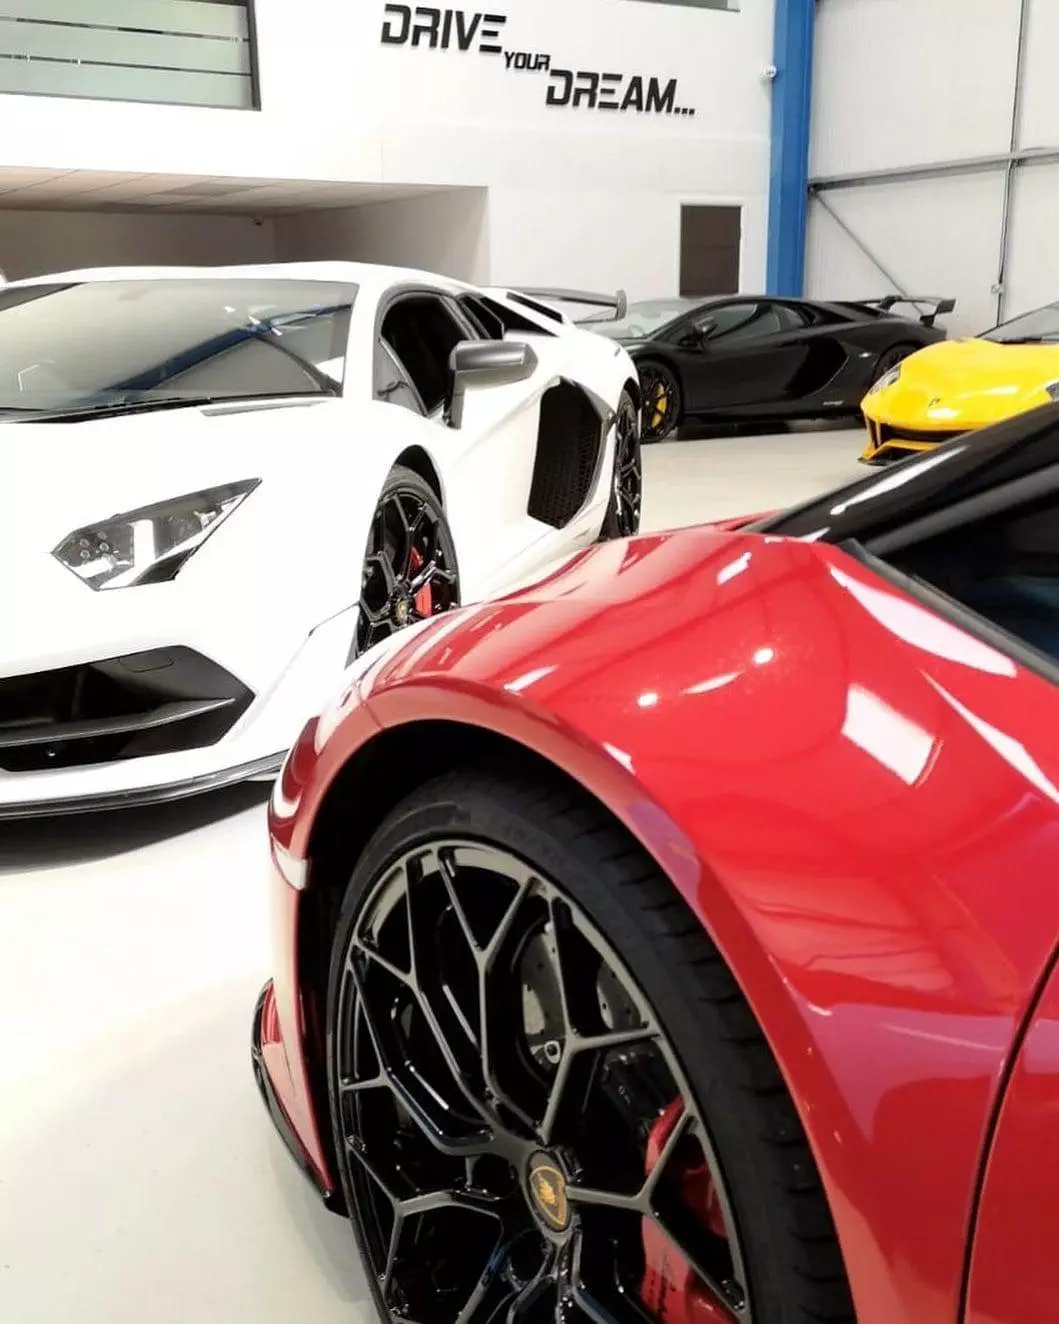 Luxury sports cars, including a red, white, and yellow model, parked in a showroom with 